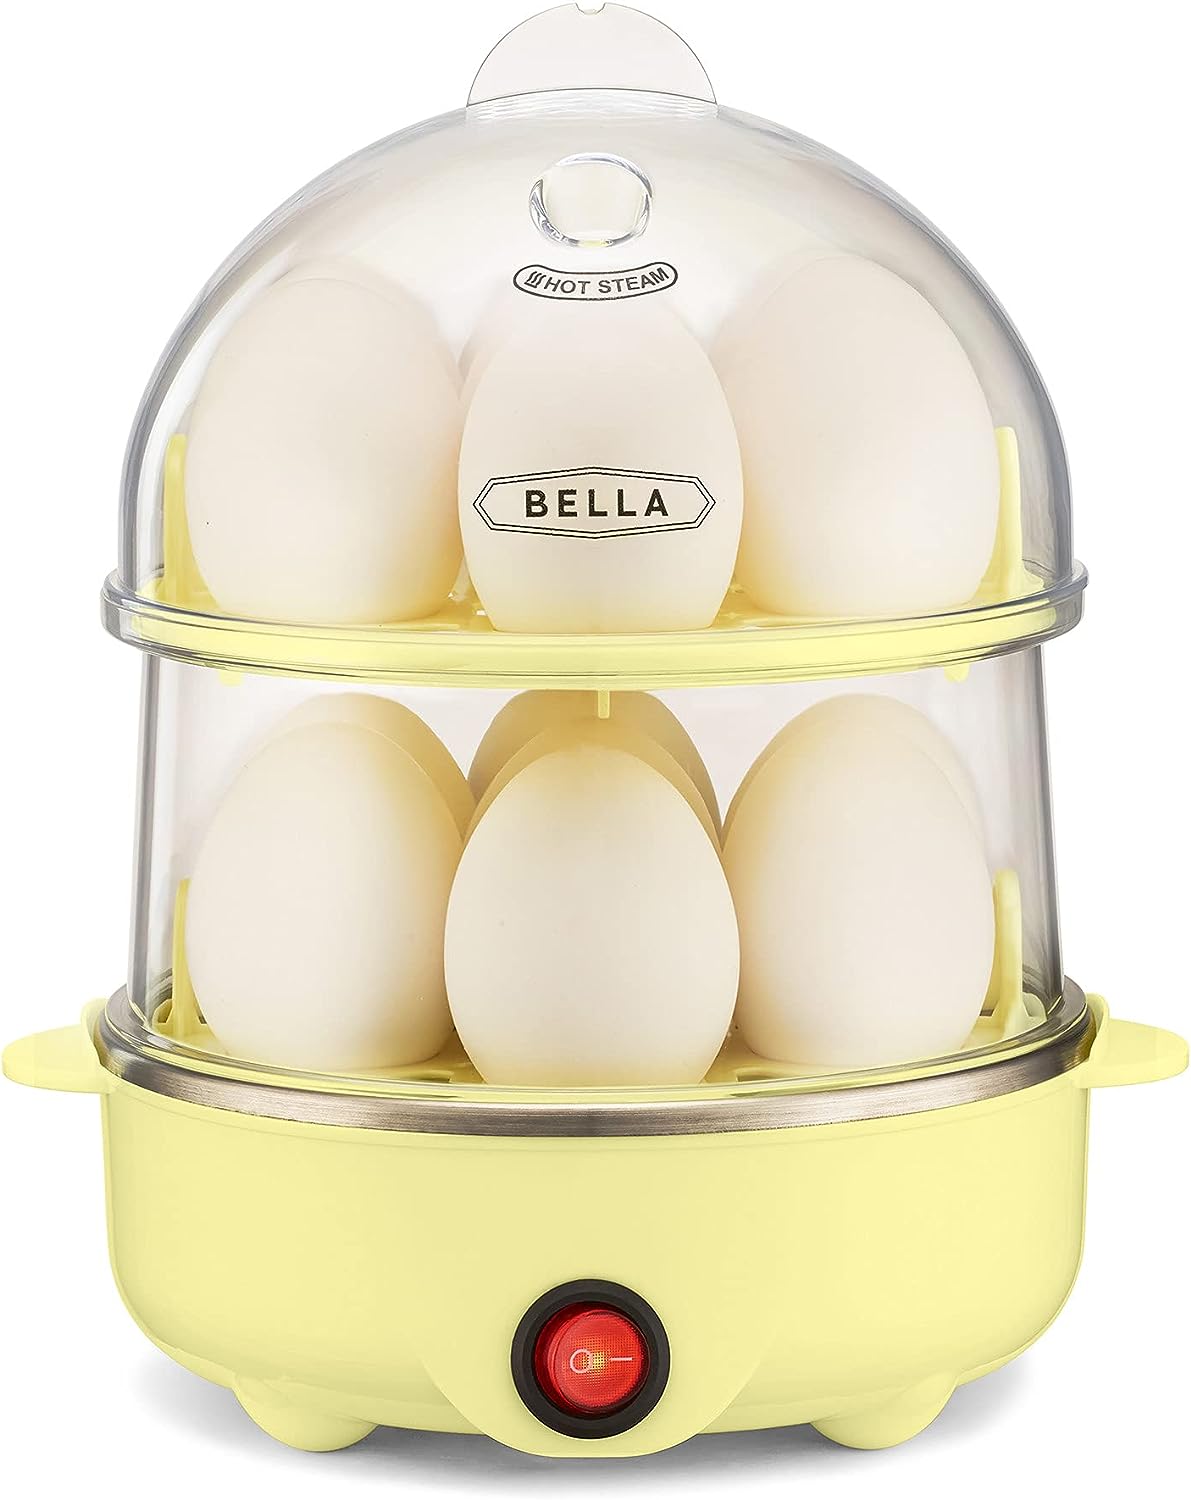 14-Egg Capacity Bella Double Tier Egg Cooker & Poacher w/ Auto Shut Off (Yellow) $12.40 + F/S w/ Prime or on Orders $35+